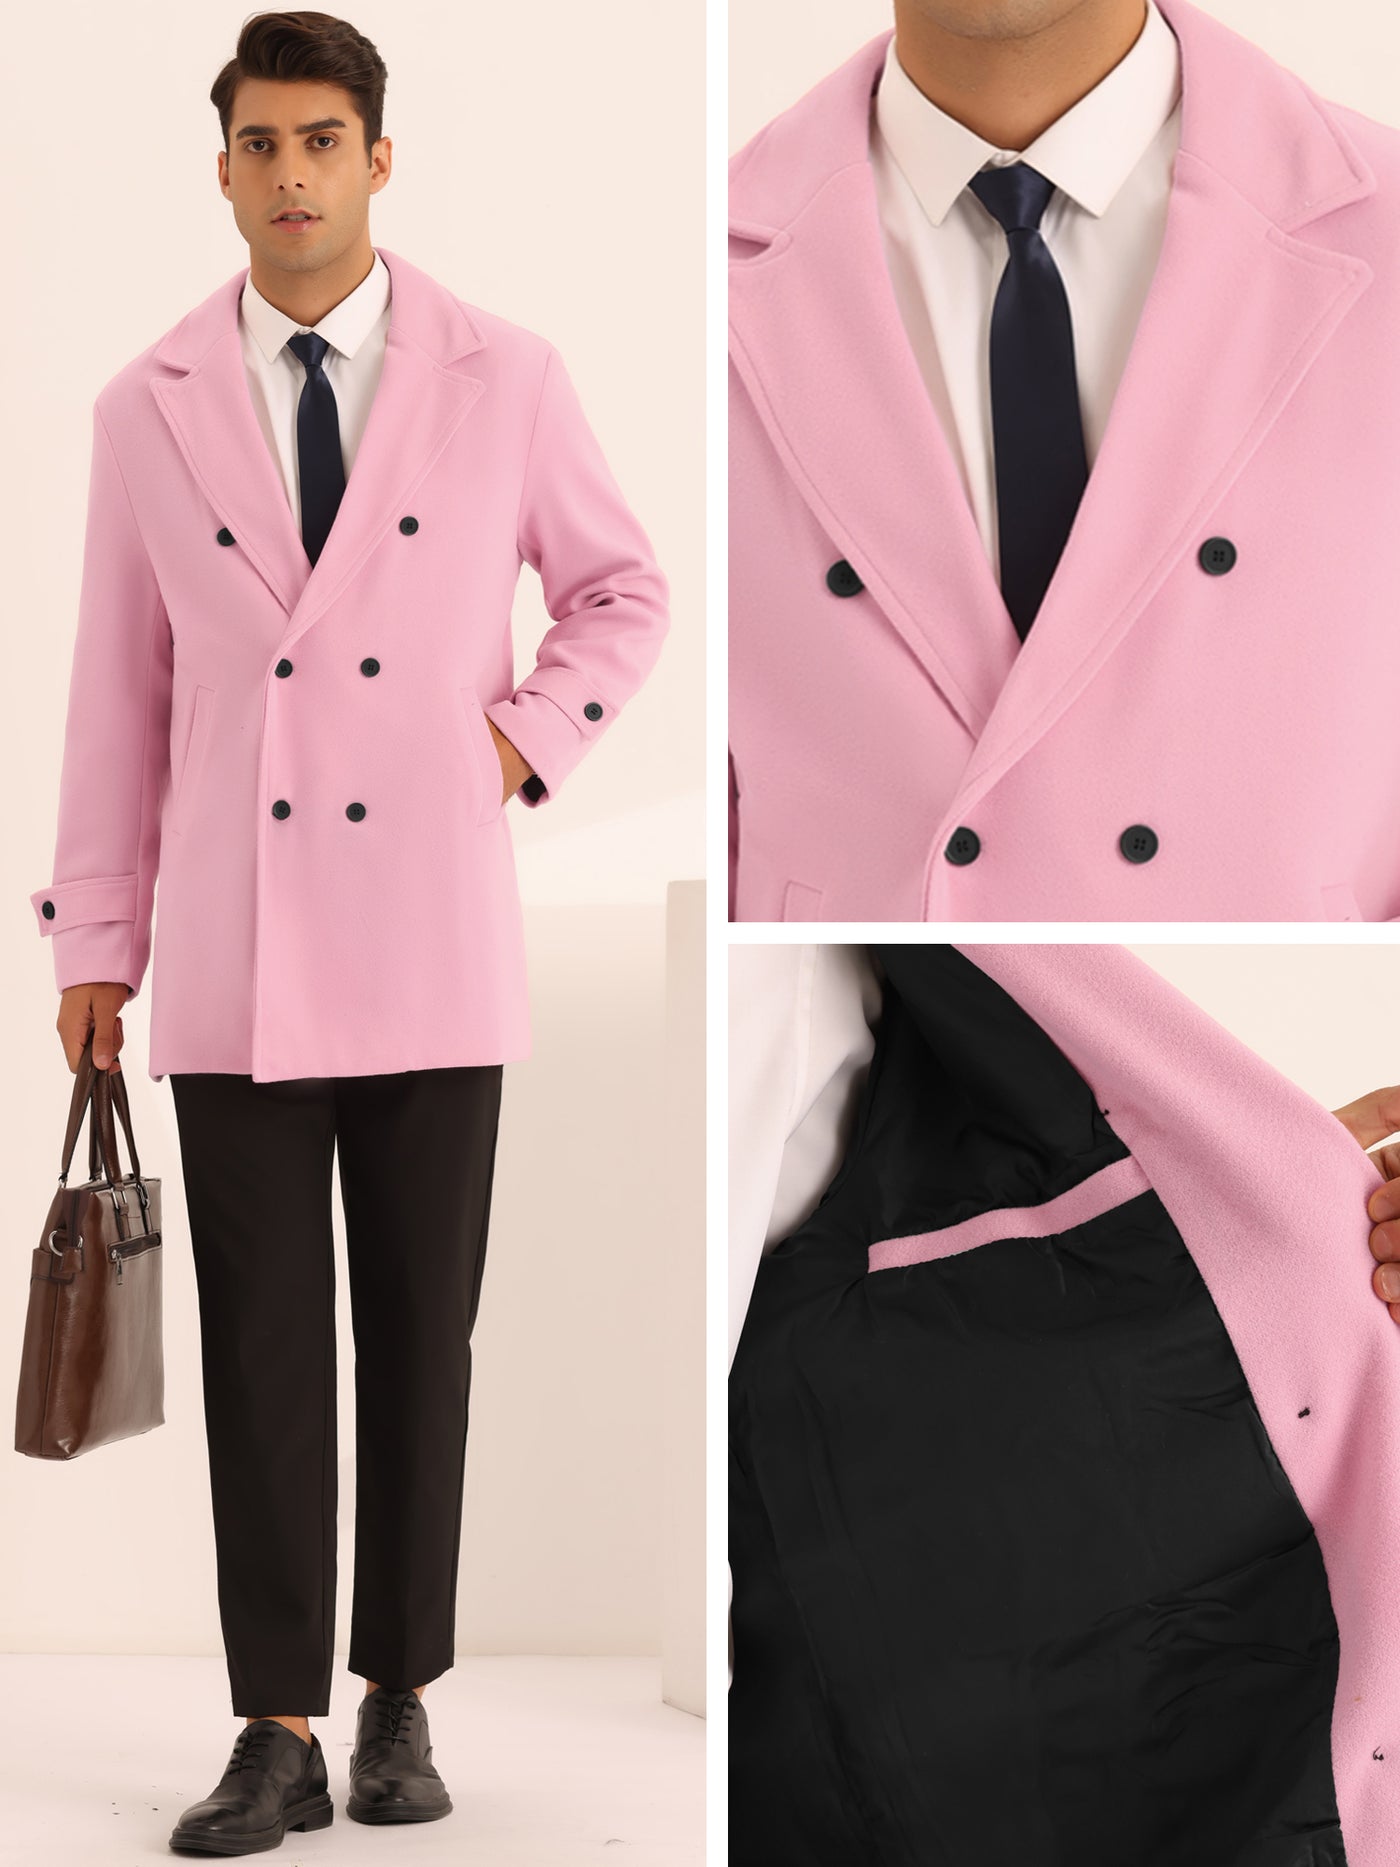 Bublédon Formal Overcoat for Men's Notched Lapel Solid Color Double Breasted Trench Coat